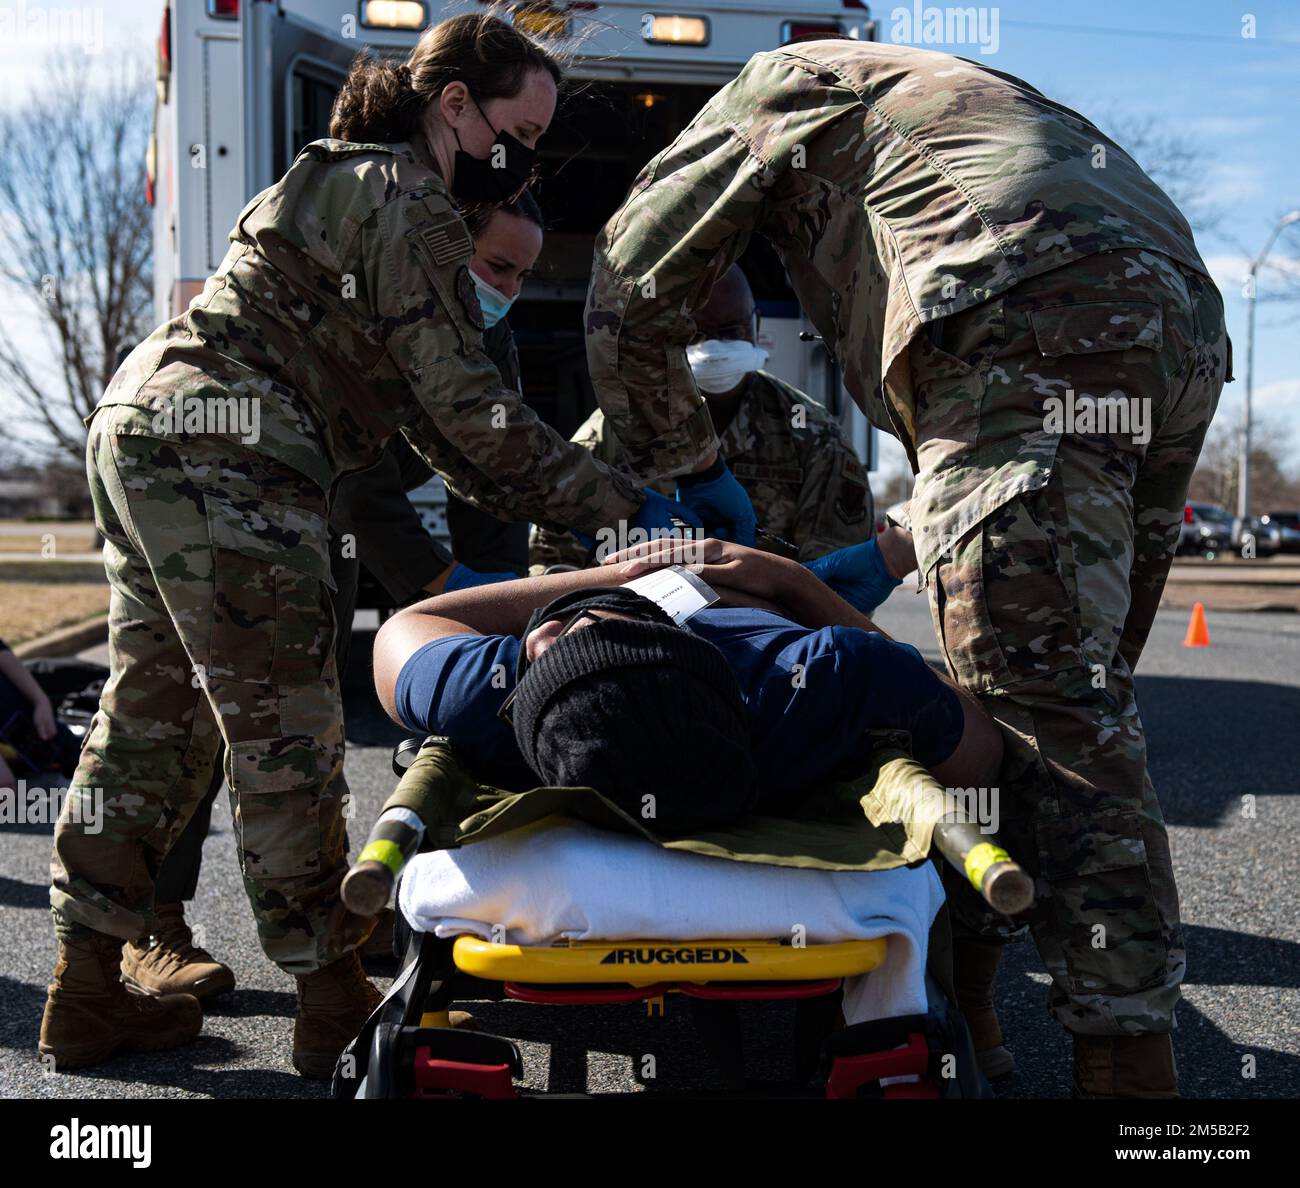 U.S. Airmen from the 633d Medical Group assess an actor participating in a Chemical, Biological, Radiological and Nuclear training exercise at Joint Base Langley-Eustis, Virginia, Feb. 17, 2022. Members from the 633d Air Base Wing performed the CBRN exercise as a part of an 18-month training requirement for Active Duty members in order to properly equip units for going down range. Stock Photo